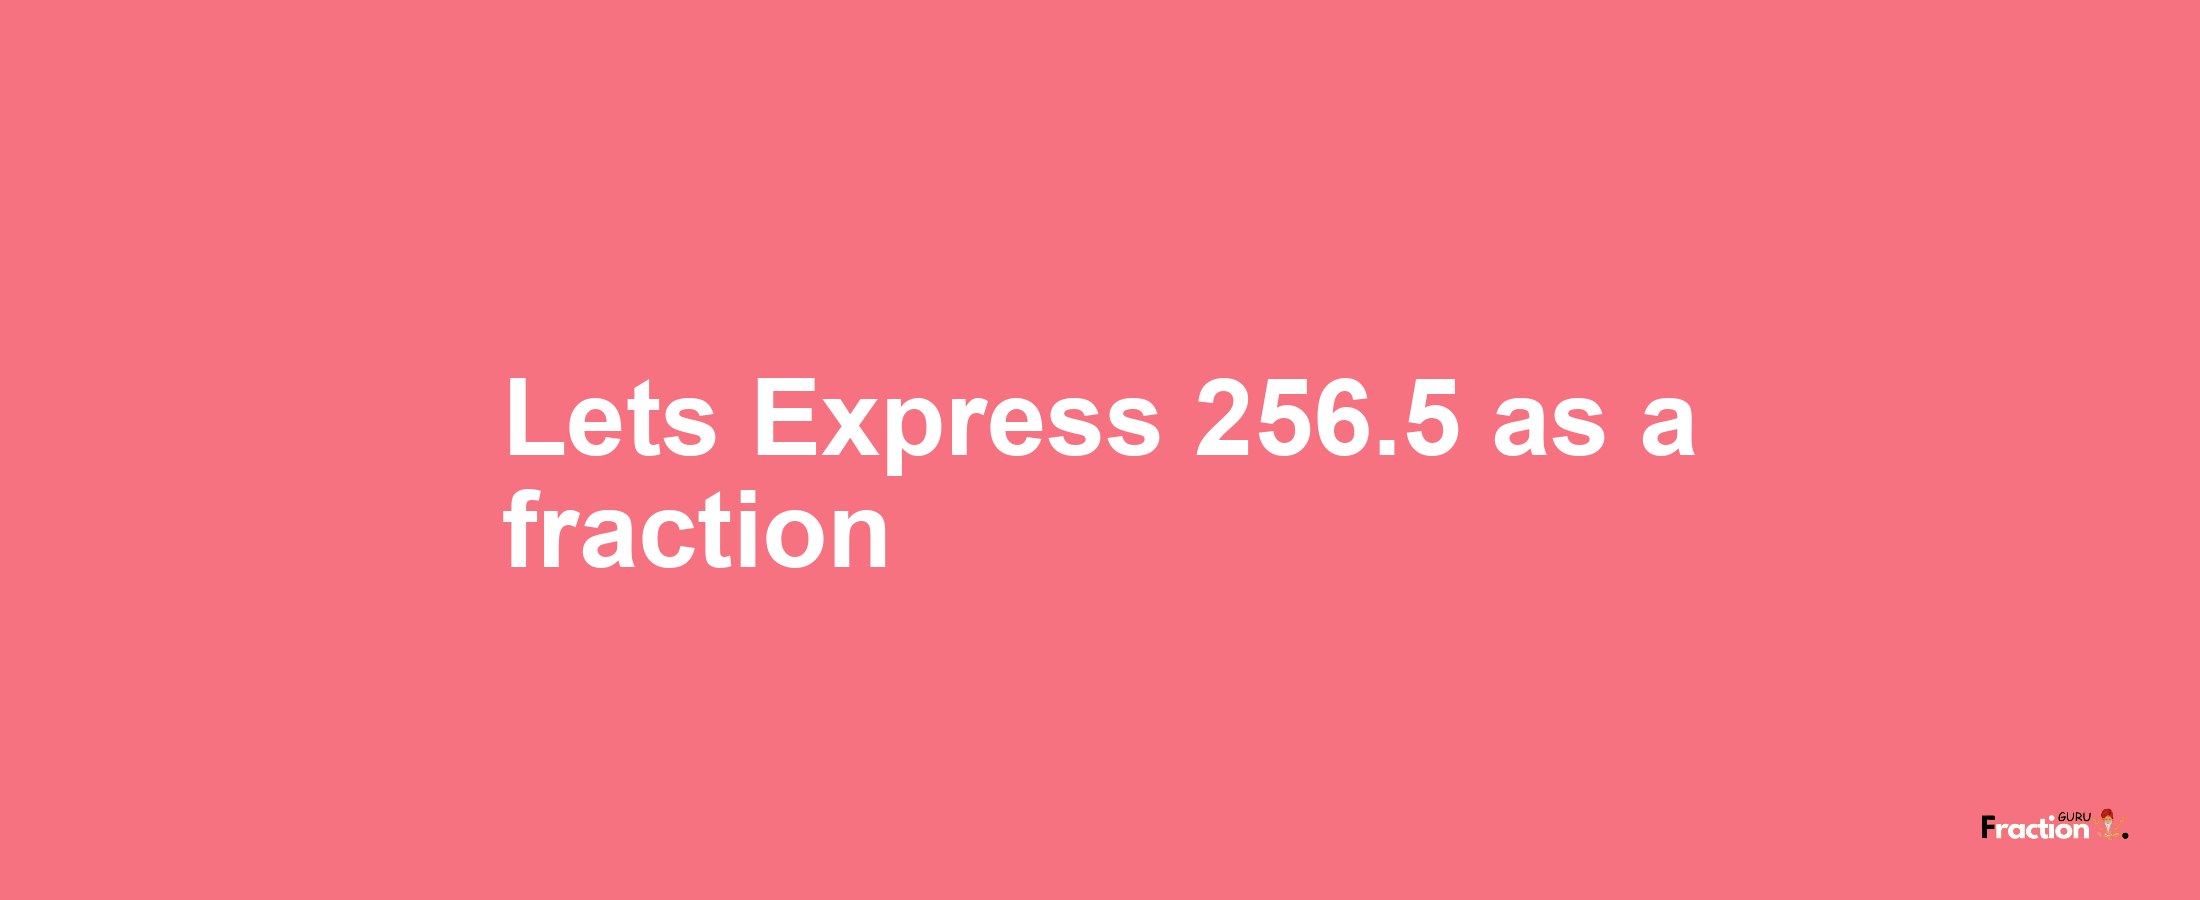 Lets Express 256.5 as afraction